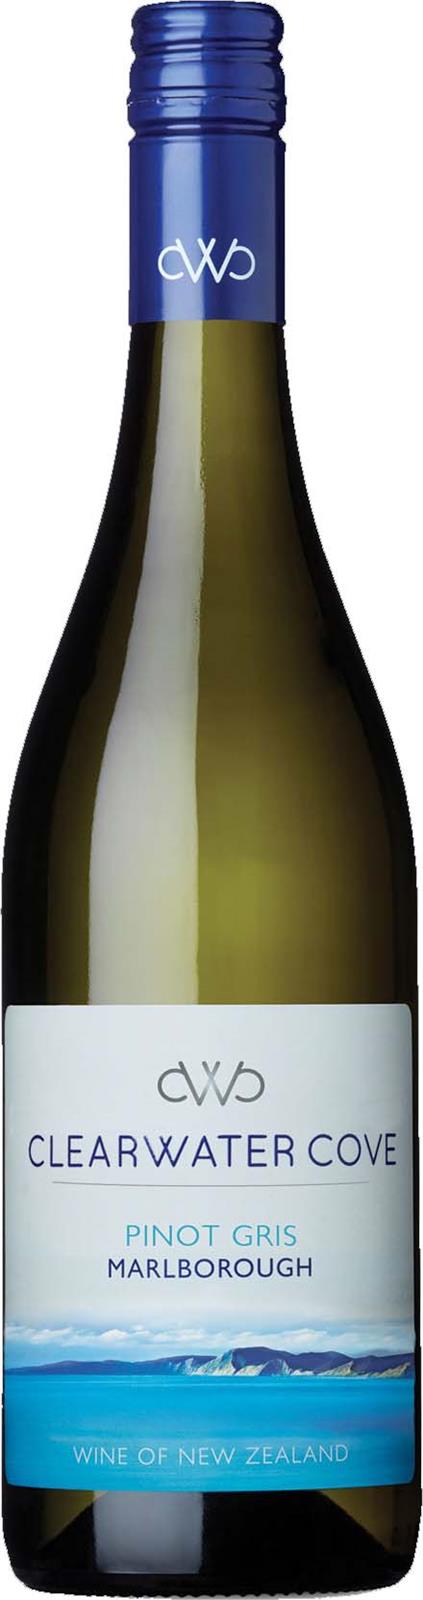 Clearwater Cove Marlborough Pinot Gris 2019